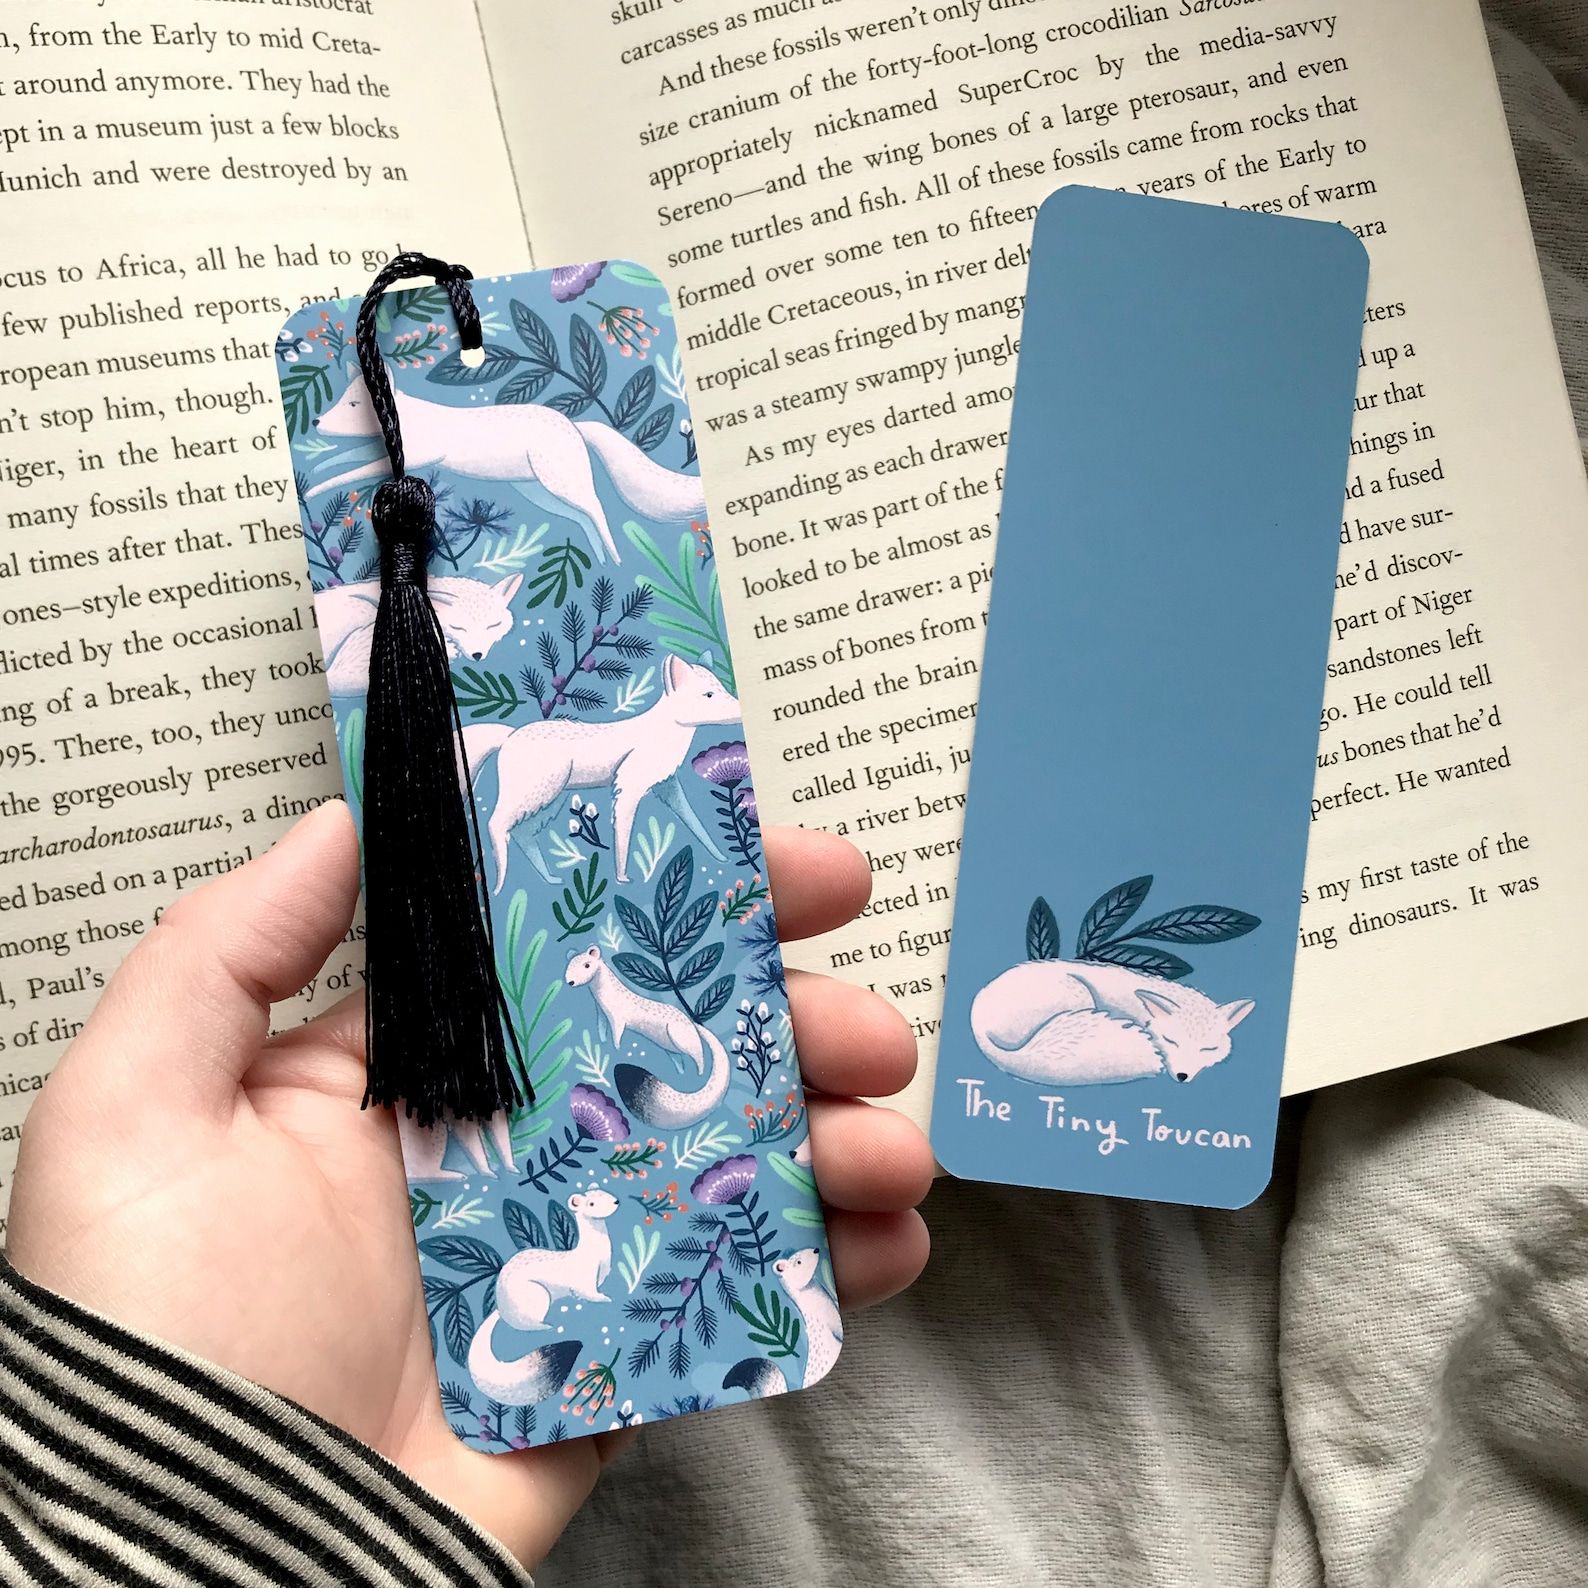 A blue bookmark depicting white foxes against a blue floral background